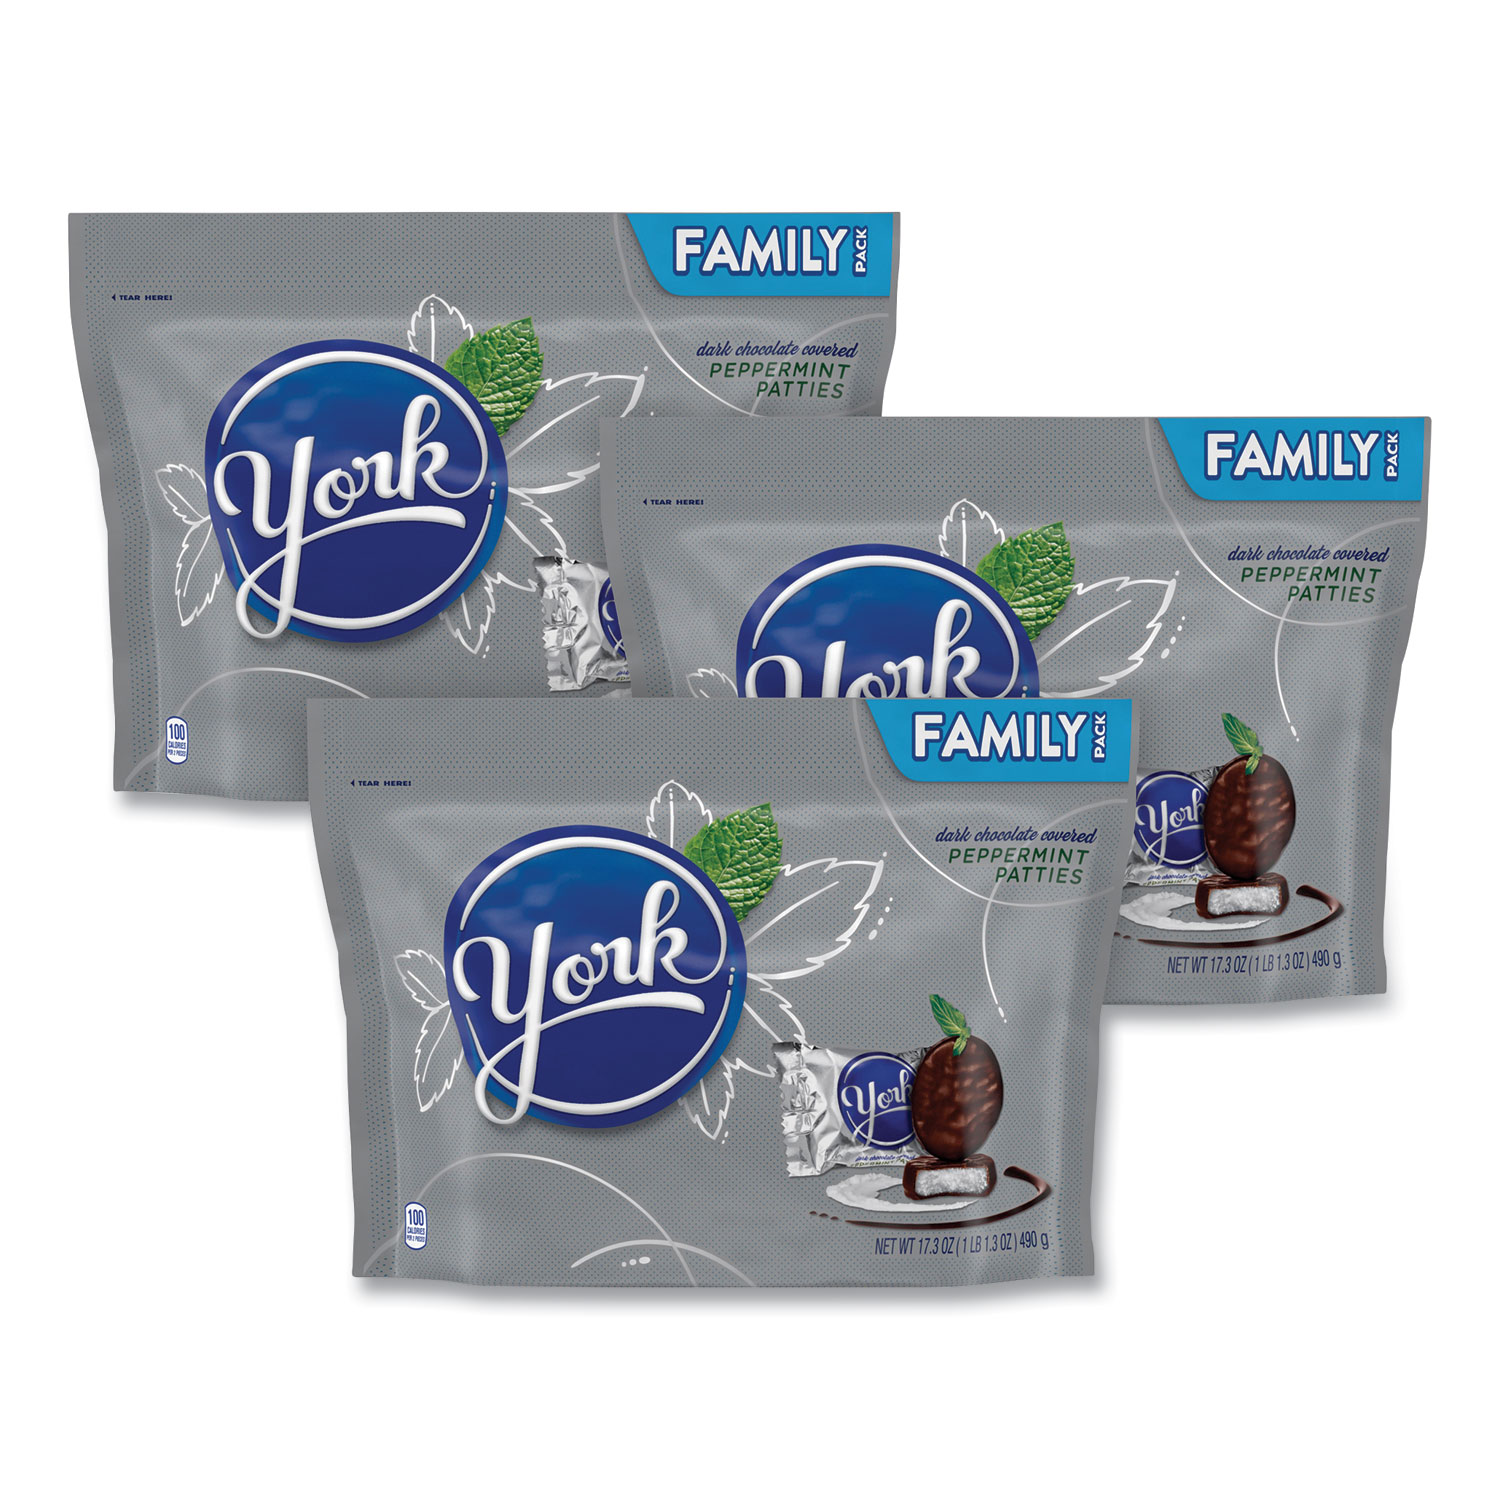  York 4593 Family Pack Peppermint Patties, Miniatures, 17.3 oz Bag, 3 Bags/Pack, Free Delivery in 1-4 Business Days (GRR24600438) 